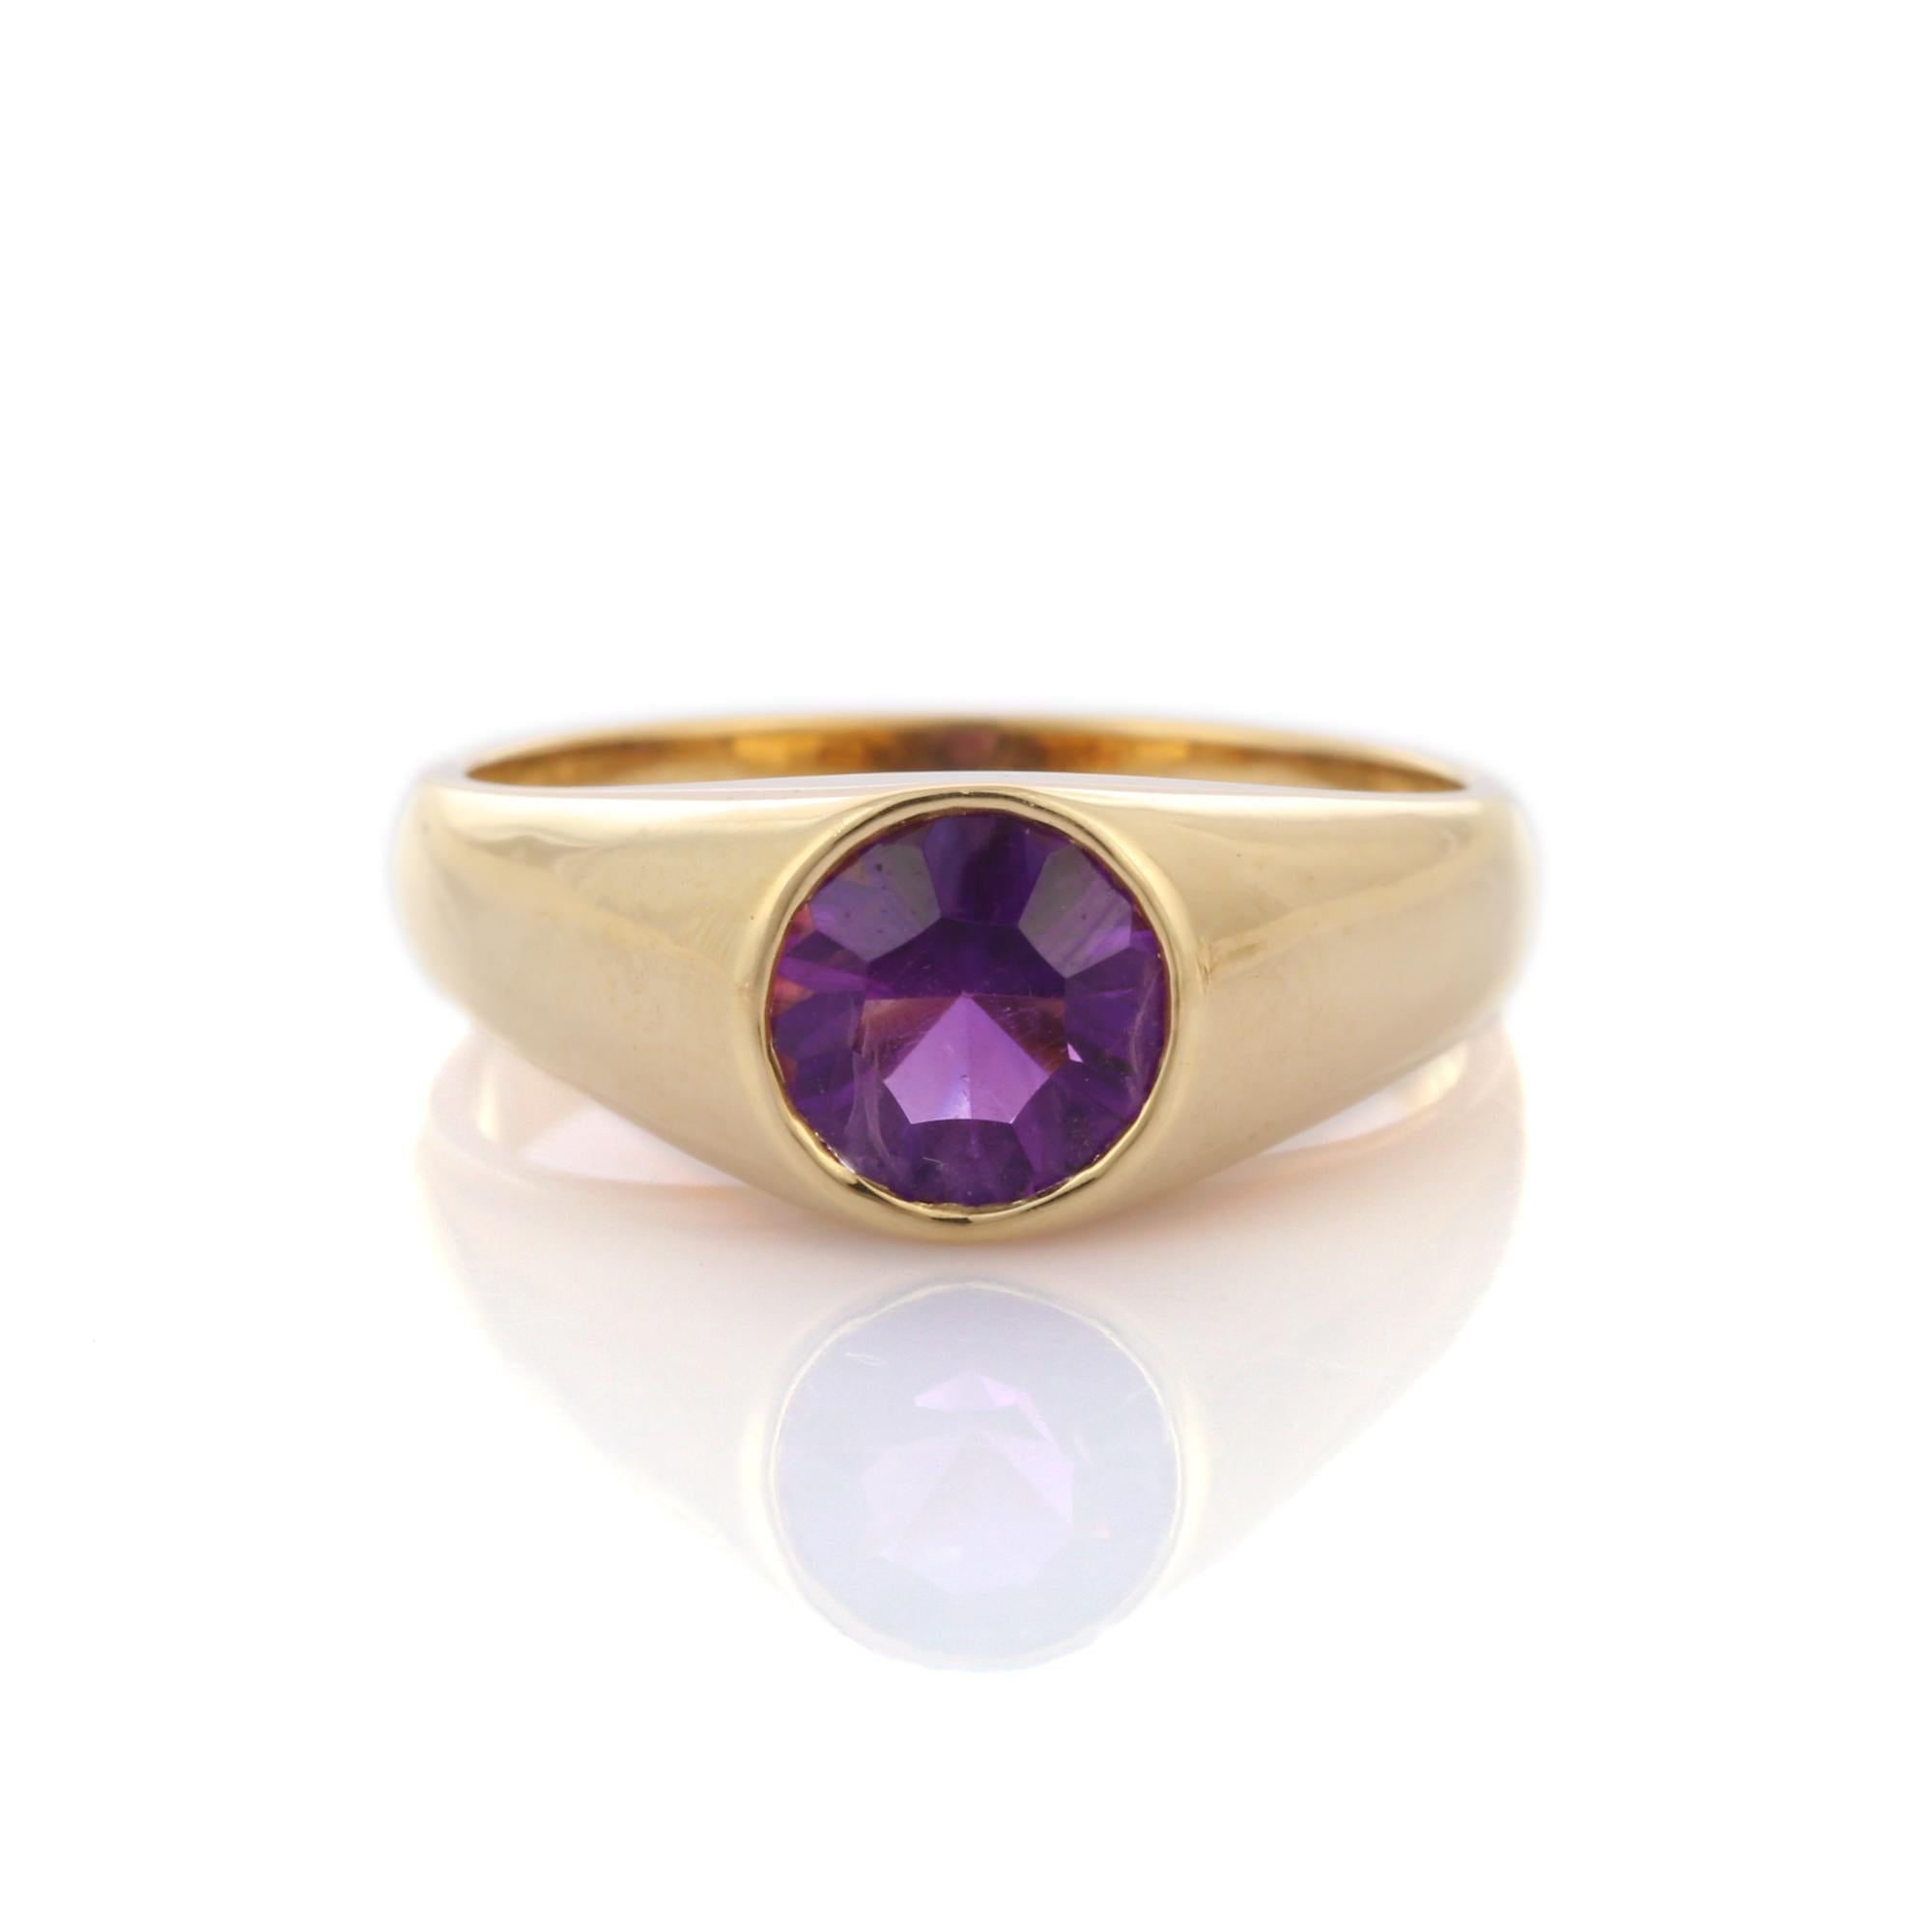 For Sale:  Unisex 14 Karat Yellow Gold Round Cut Amethyst Solitaire Ring 8